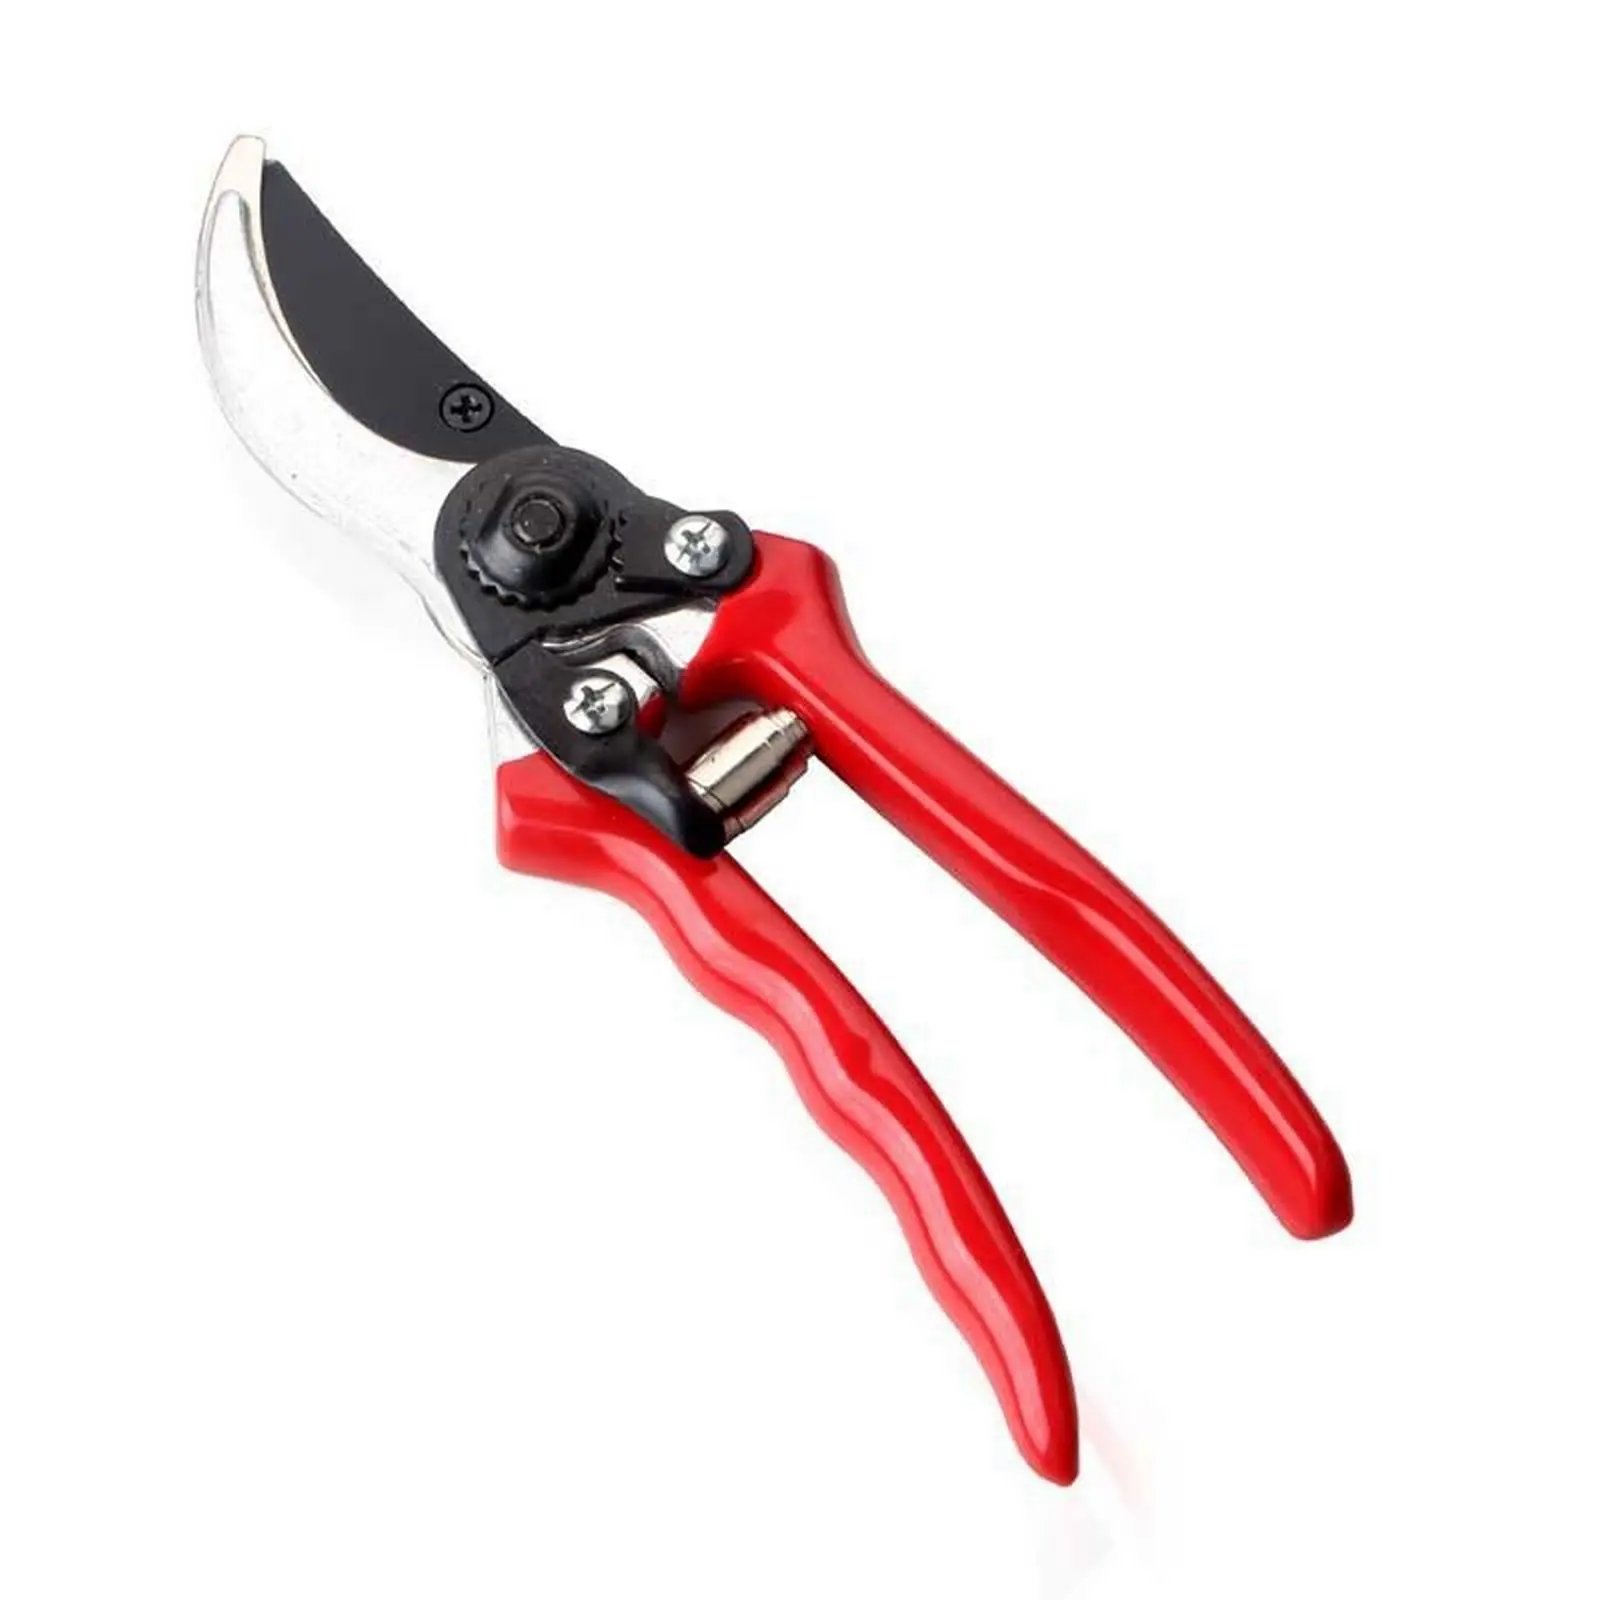 Professional Hand Pruner Garden Pruning Shears Trimmers Clipper Safety Lock US 